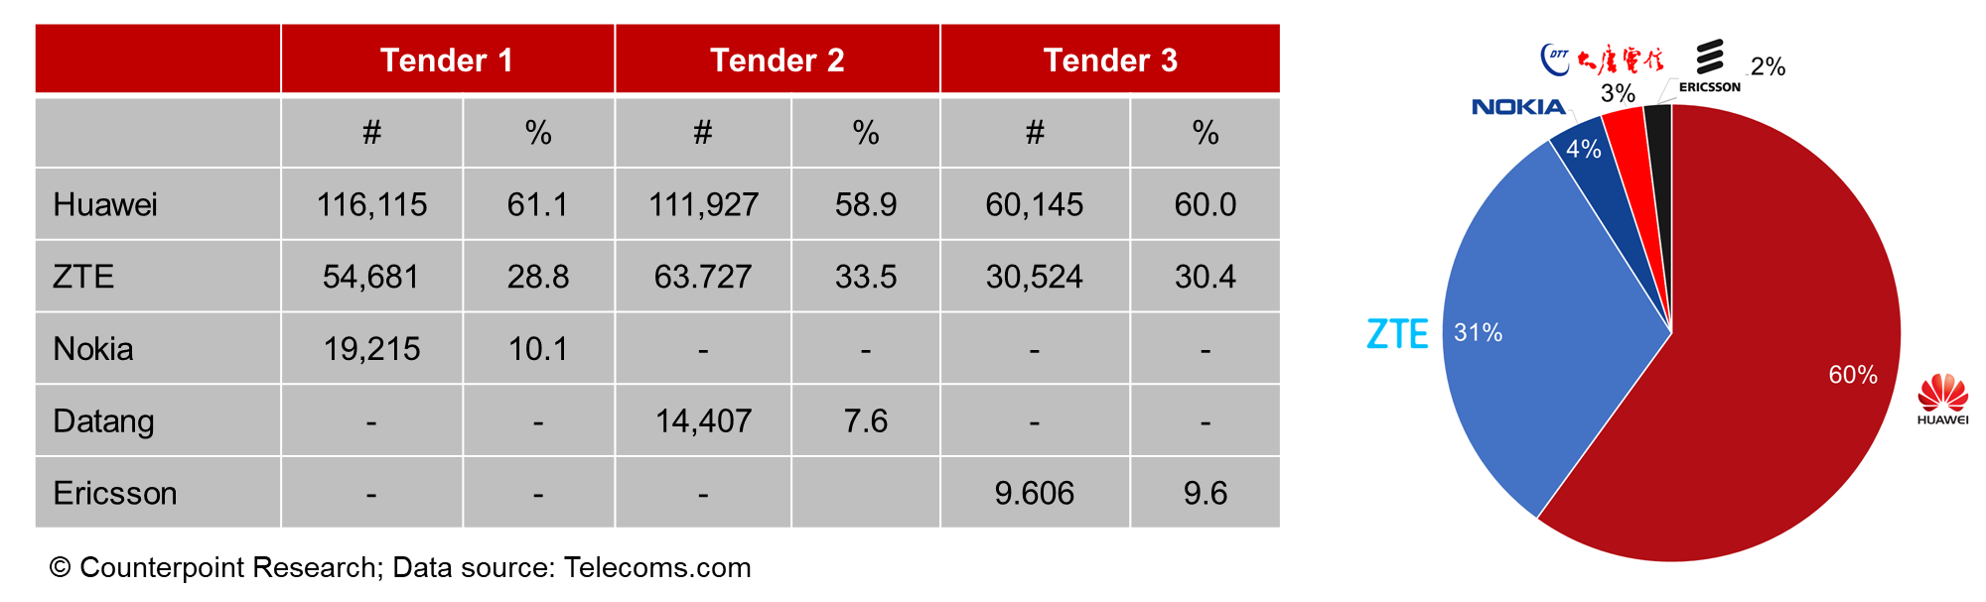 Individual Tender Results (left) and Overall Market Share (Right)